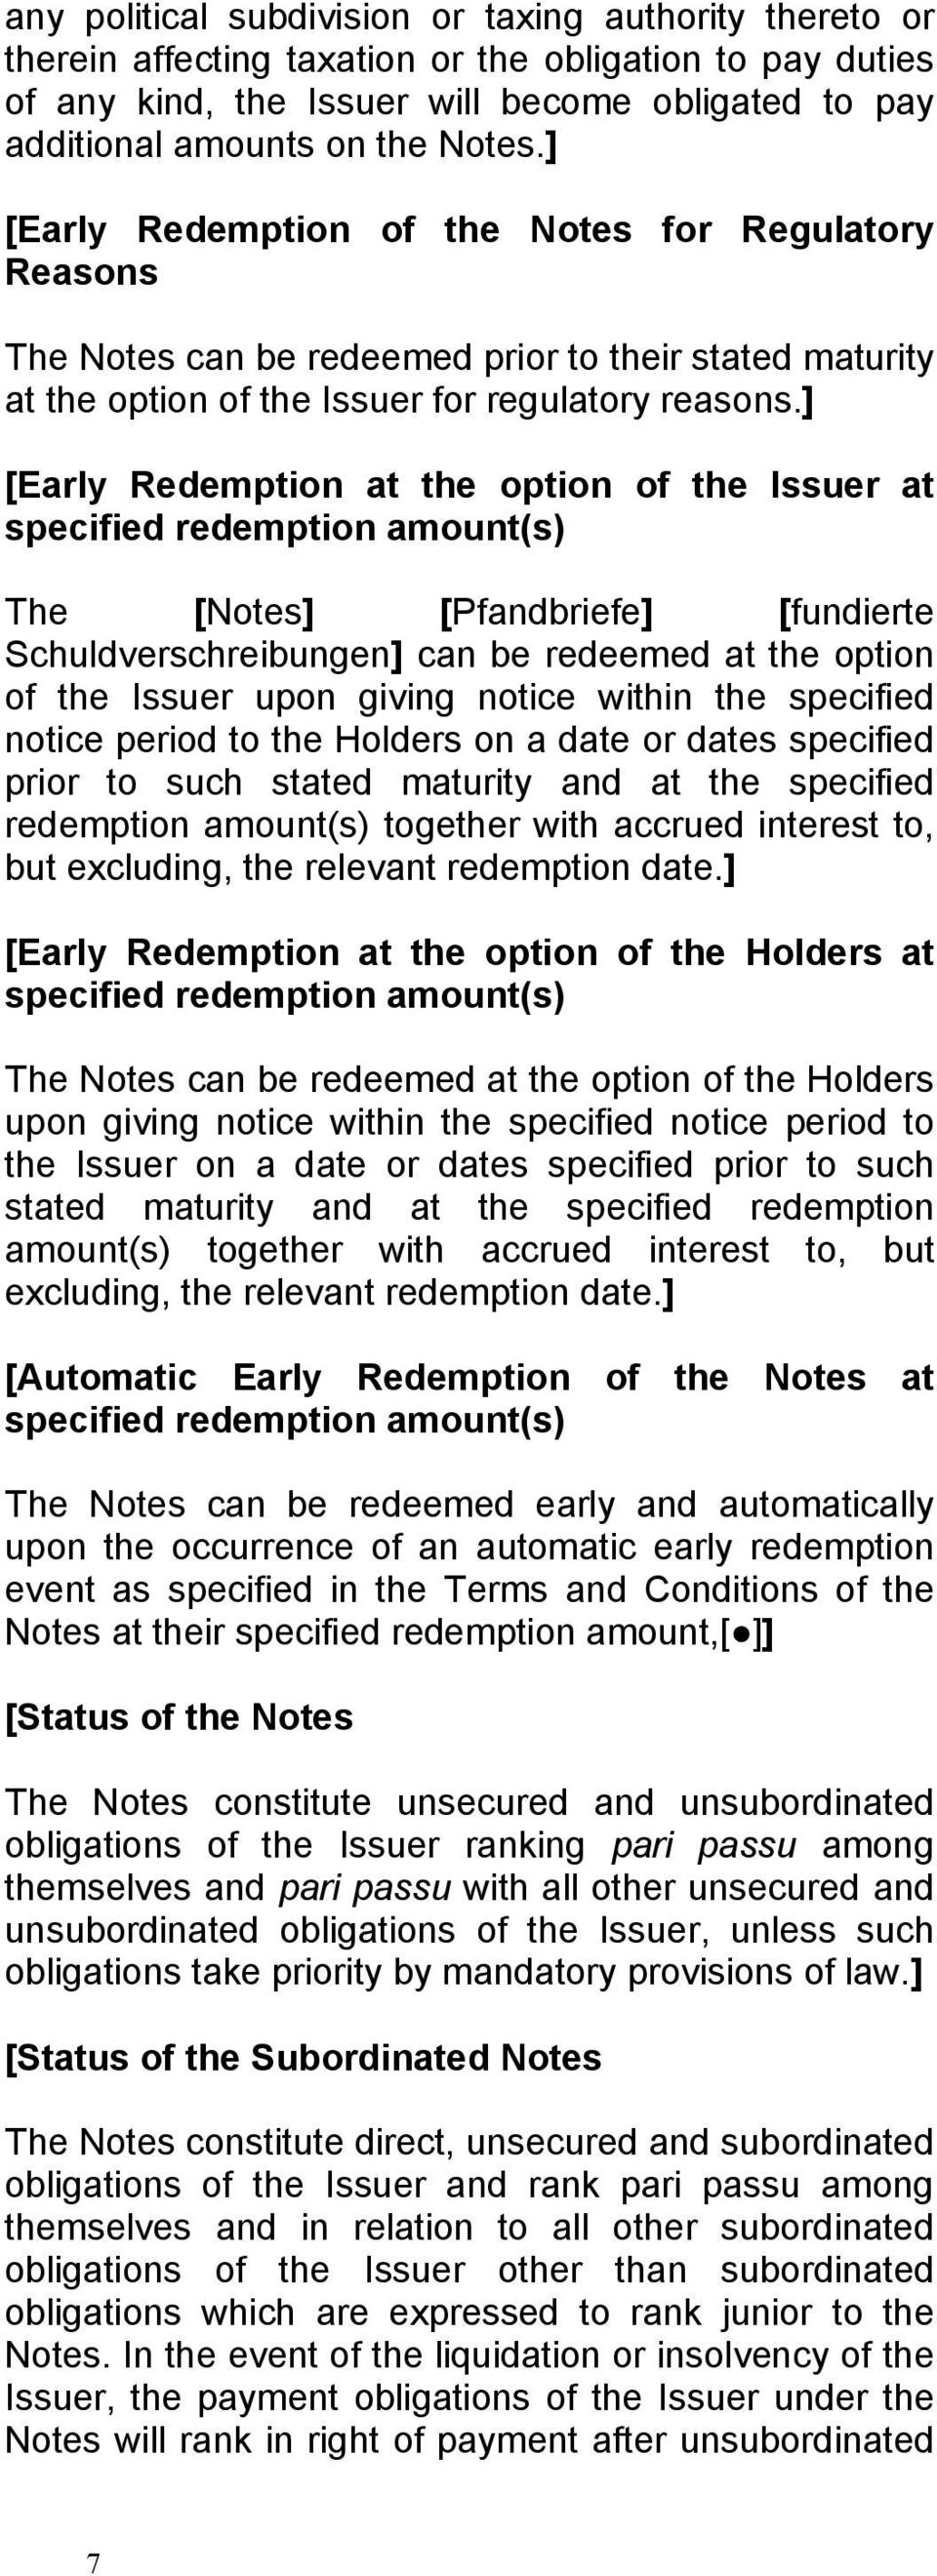 ] [Early Redemption at the option of the Issuer at specified redemption amount(s) The [Notes] [Pfandbriefe] [fundierte Schuldverschreibungen] can be redeemed at the option of the Issuer upon giving